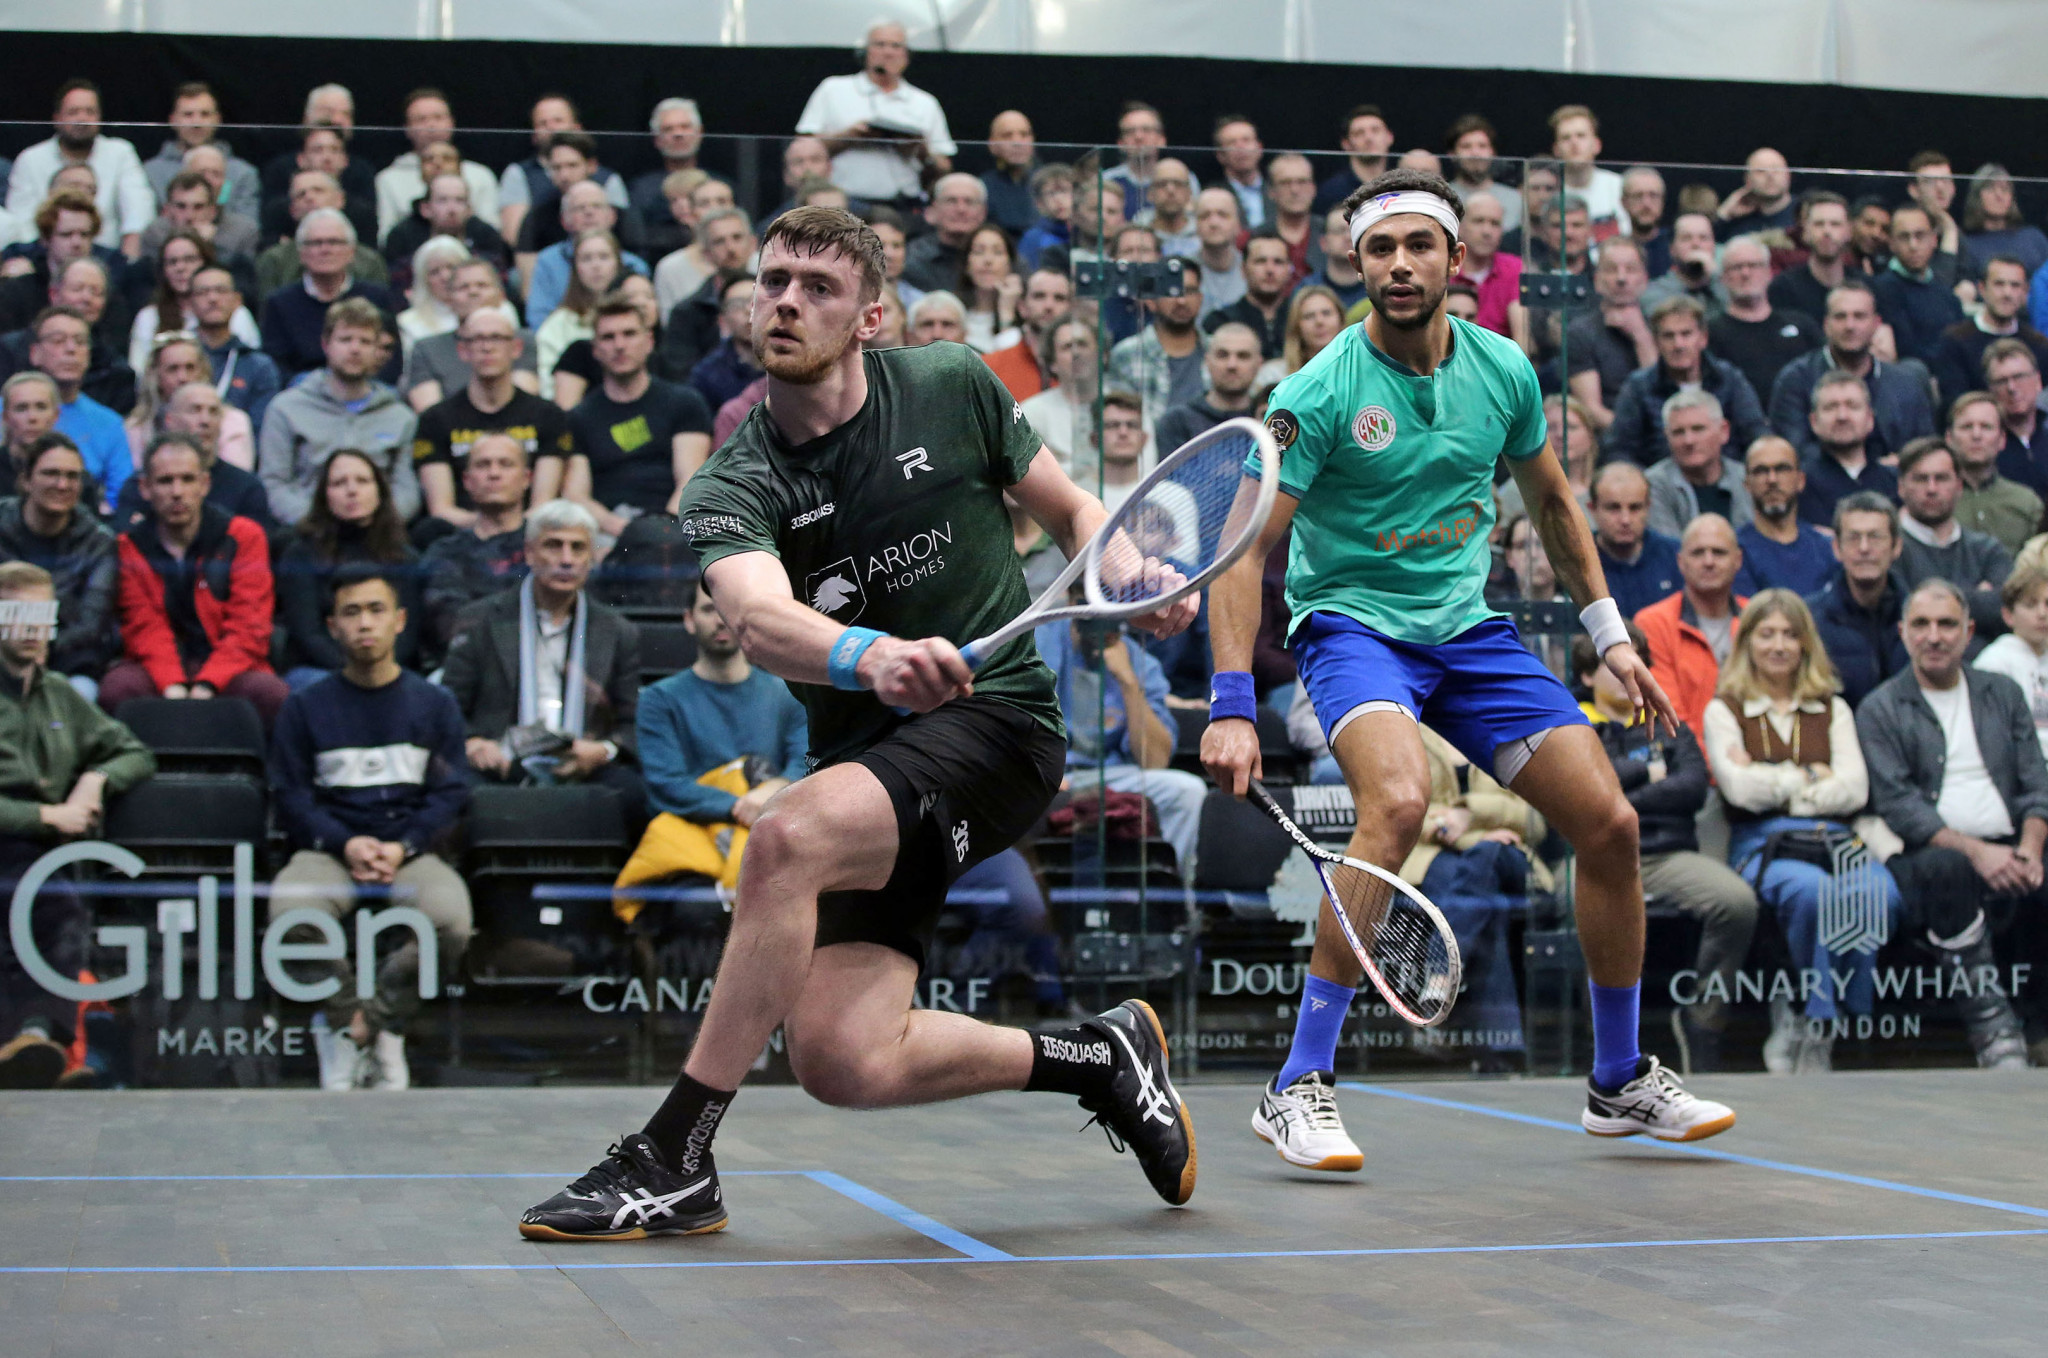 Patrick Rooney ensured England will remain well represented in this PSA World Tour Gold event as he defeated Egypt's Mohamed ElSherbini ©PSA